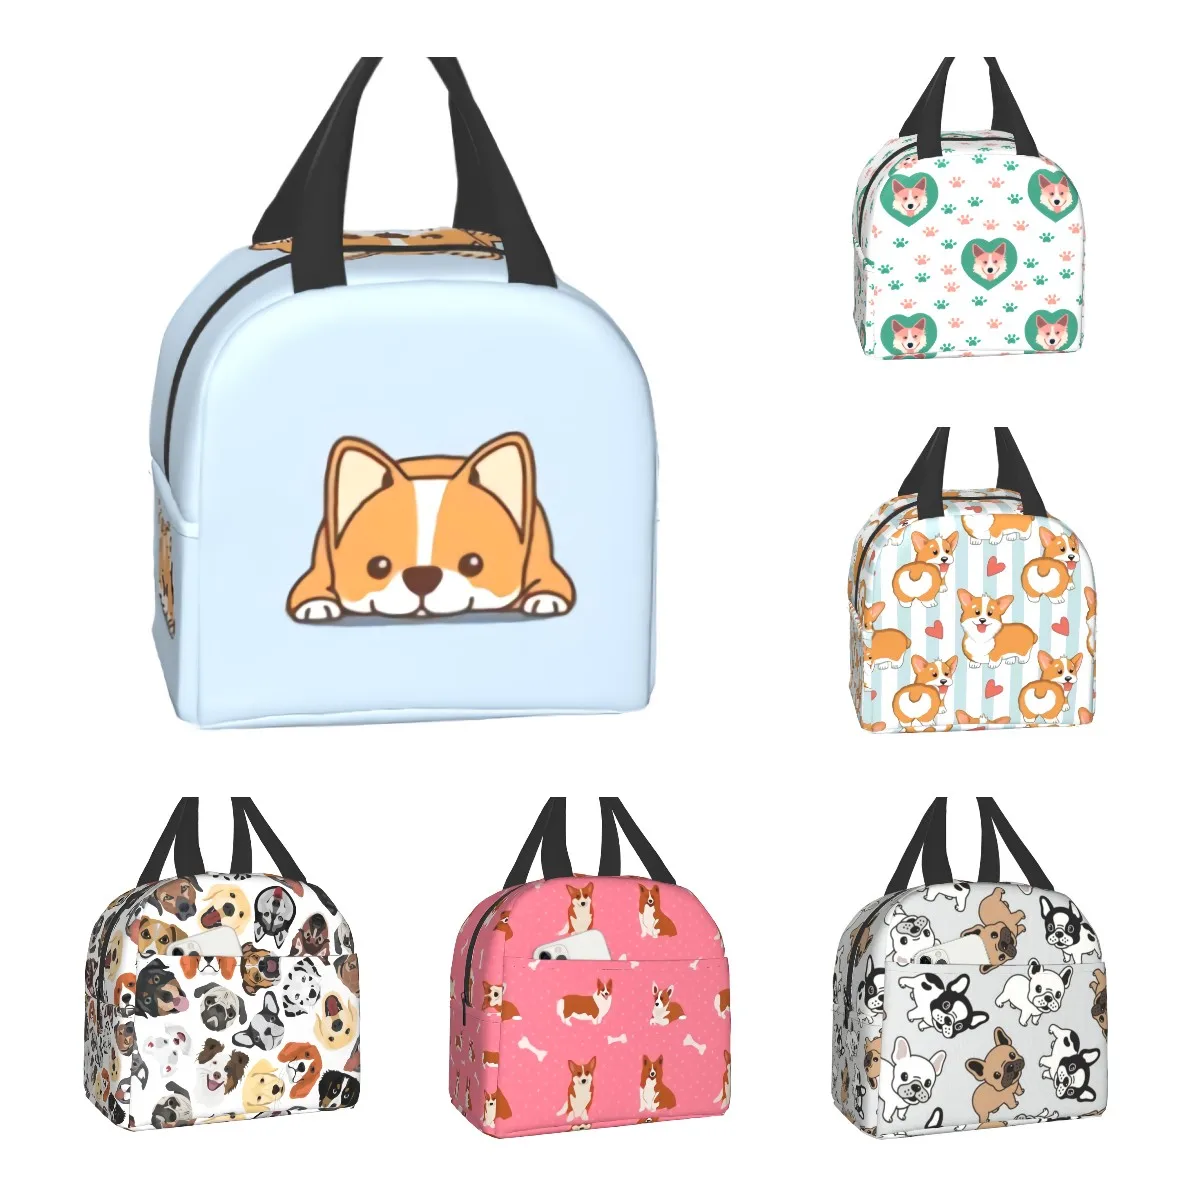 

Corgi Dog Lying Down Reusable Insulated Lunch Bag Adorable Cartoon Puppy Animal Print Cooler Tote Box with Front Pocket Zipper